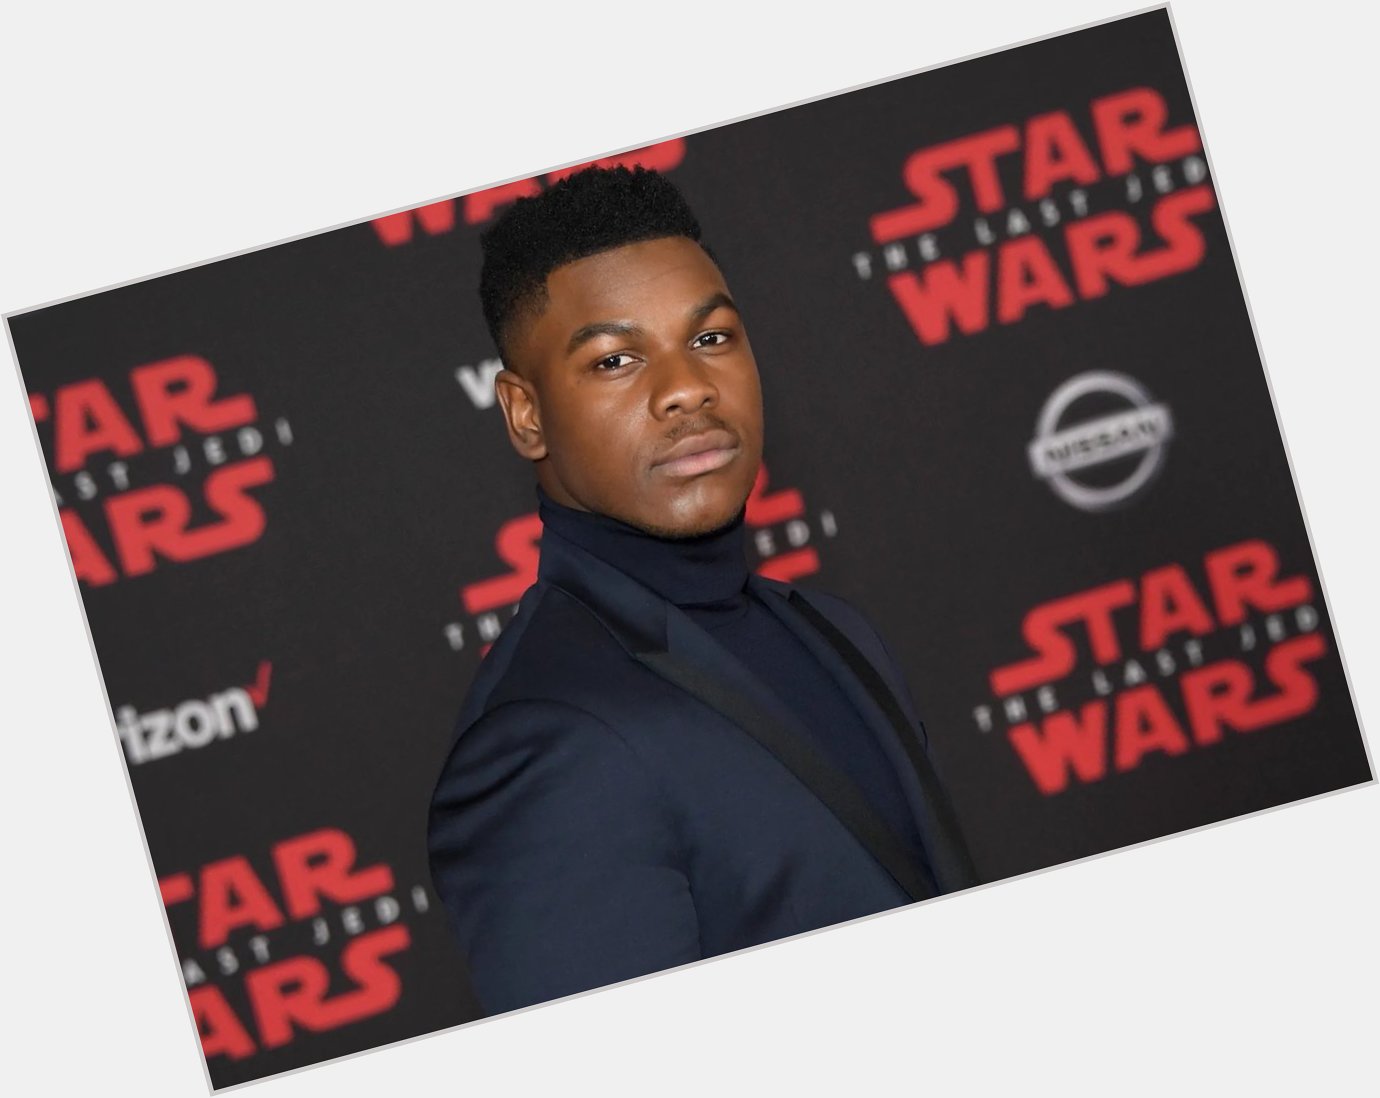 Wishing the incredible John Boyega a HAPPY BIRTHDAY! 

May the Force be with you, always!   